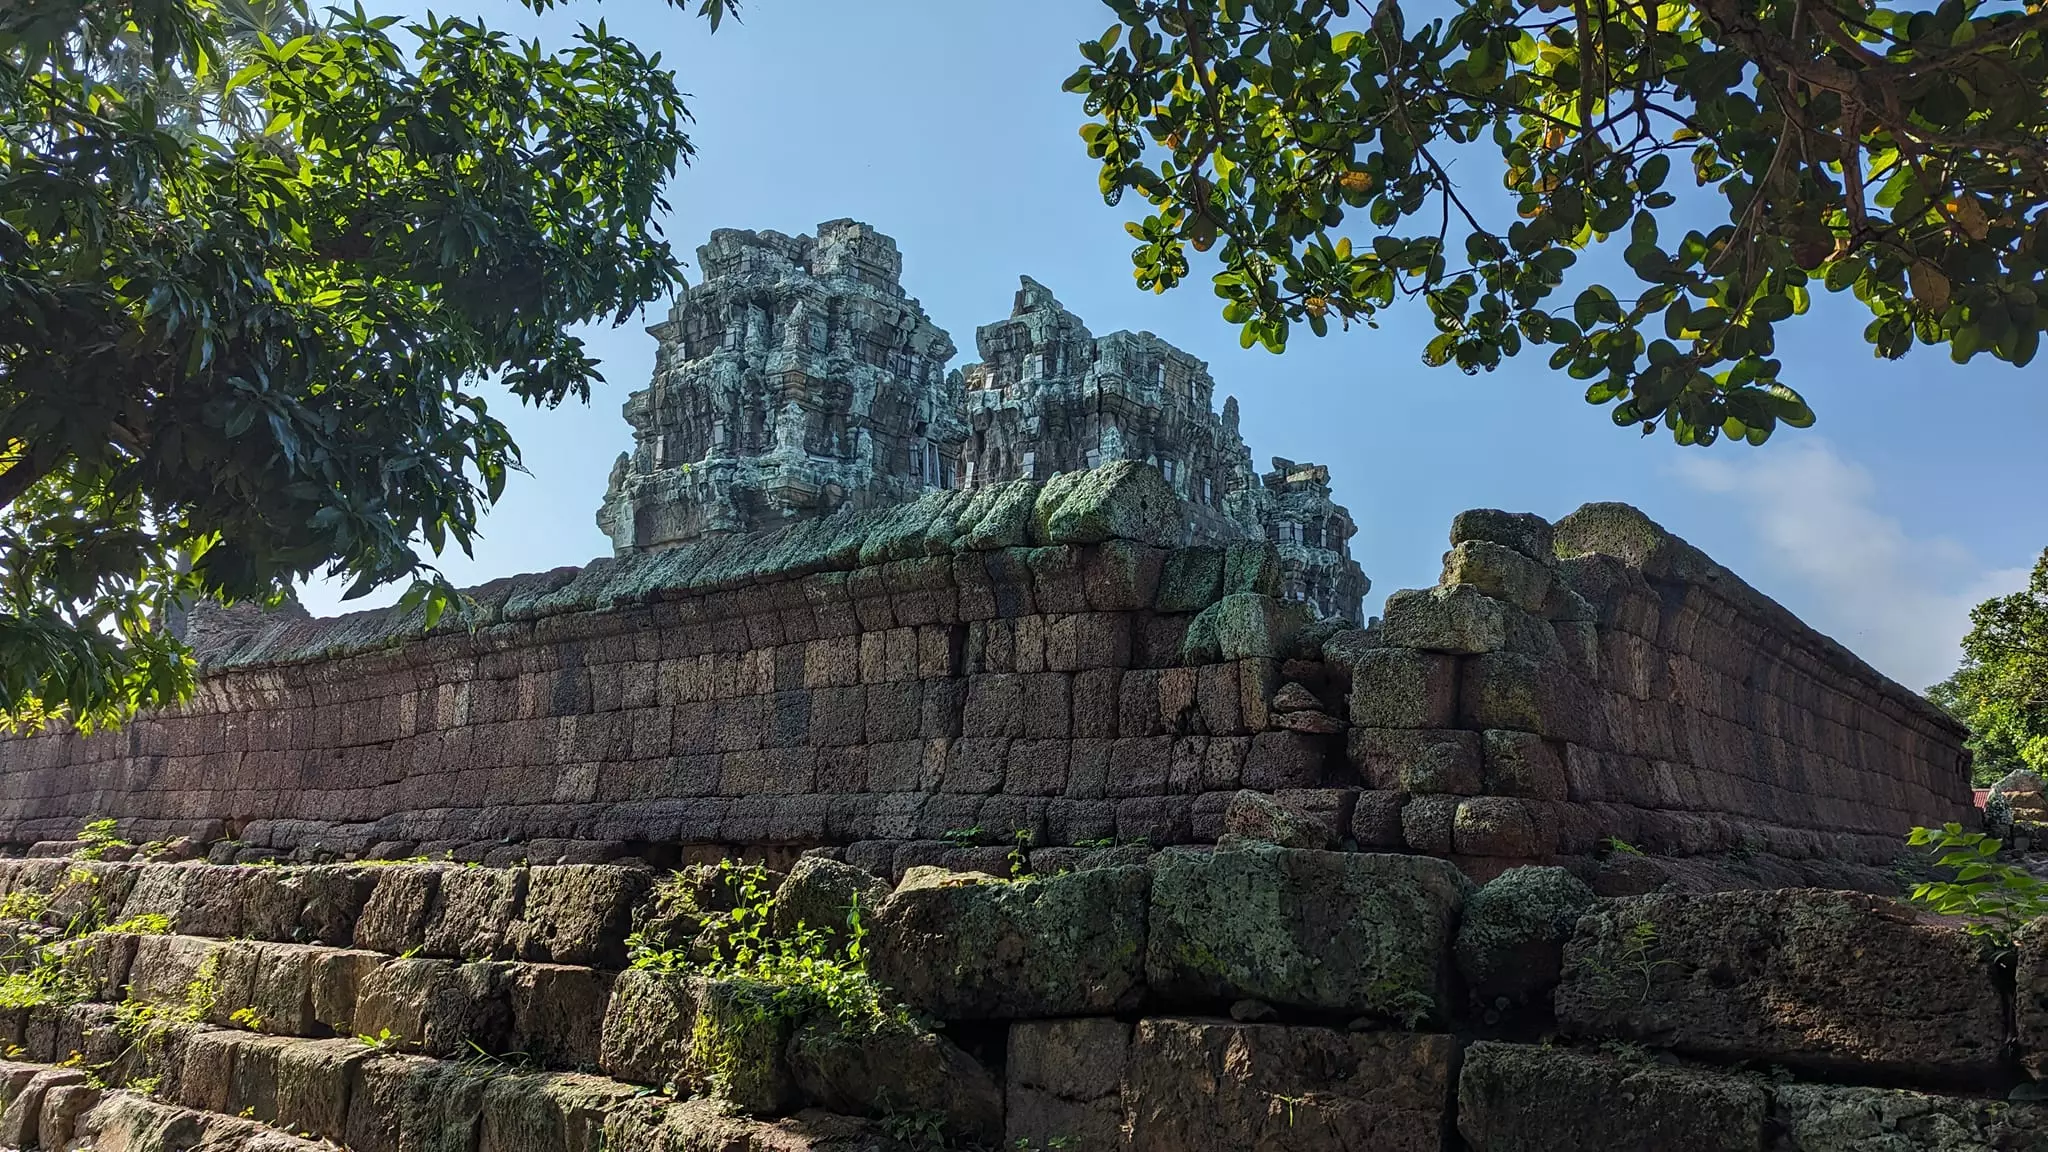 Temple at the top of Phnom Krom